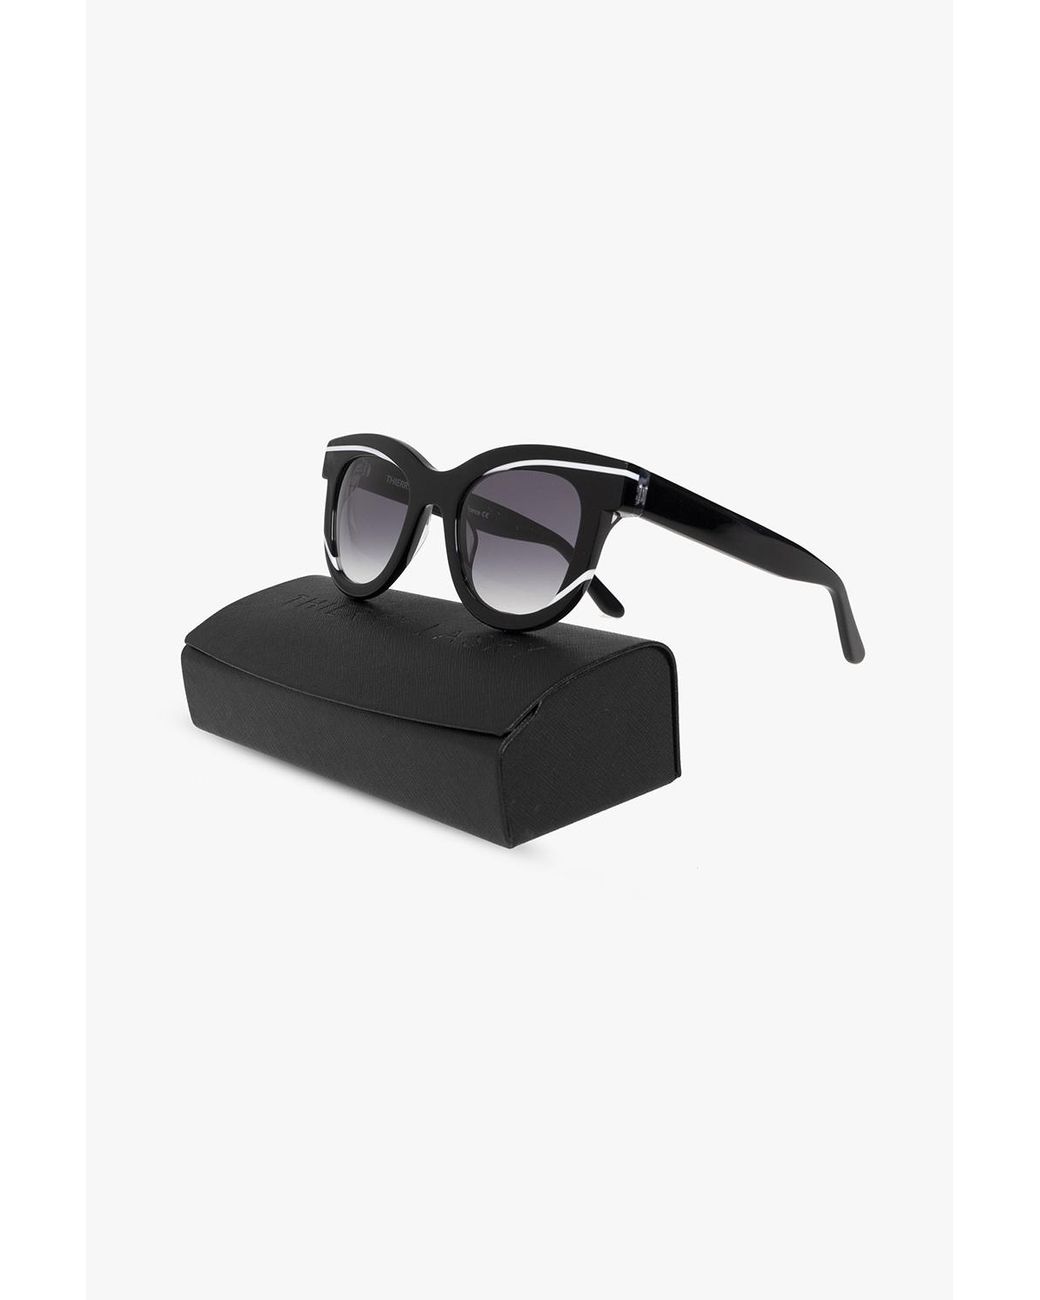 Thierry Lasry Gifty Sunglasses 700 Black Frame Black Gradient Lenses 